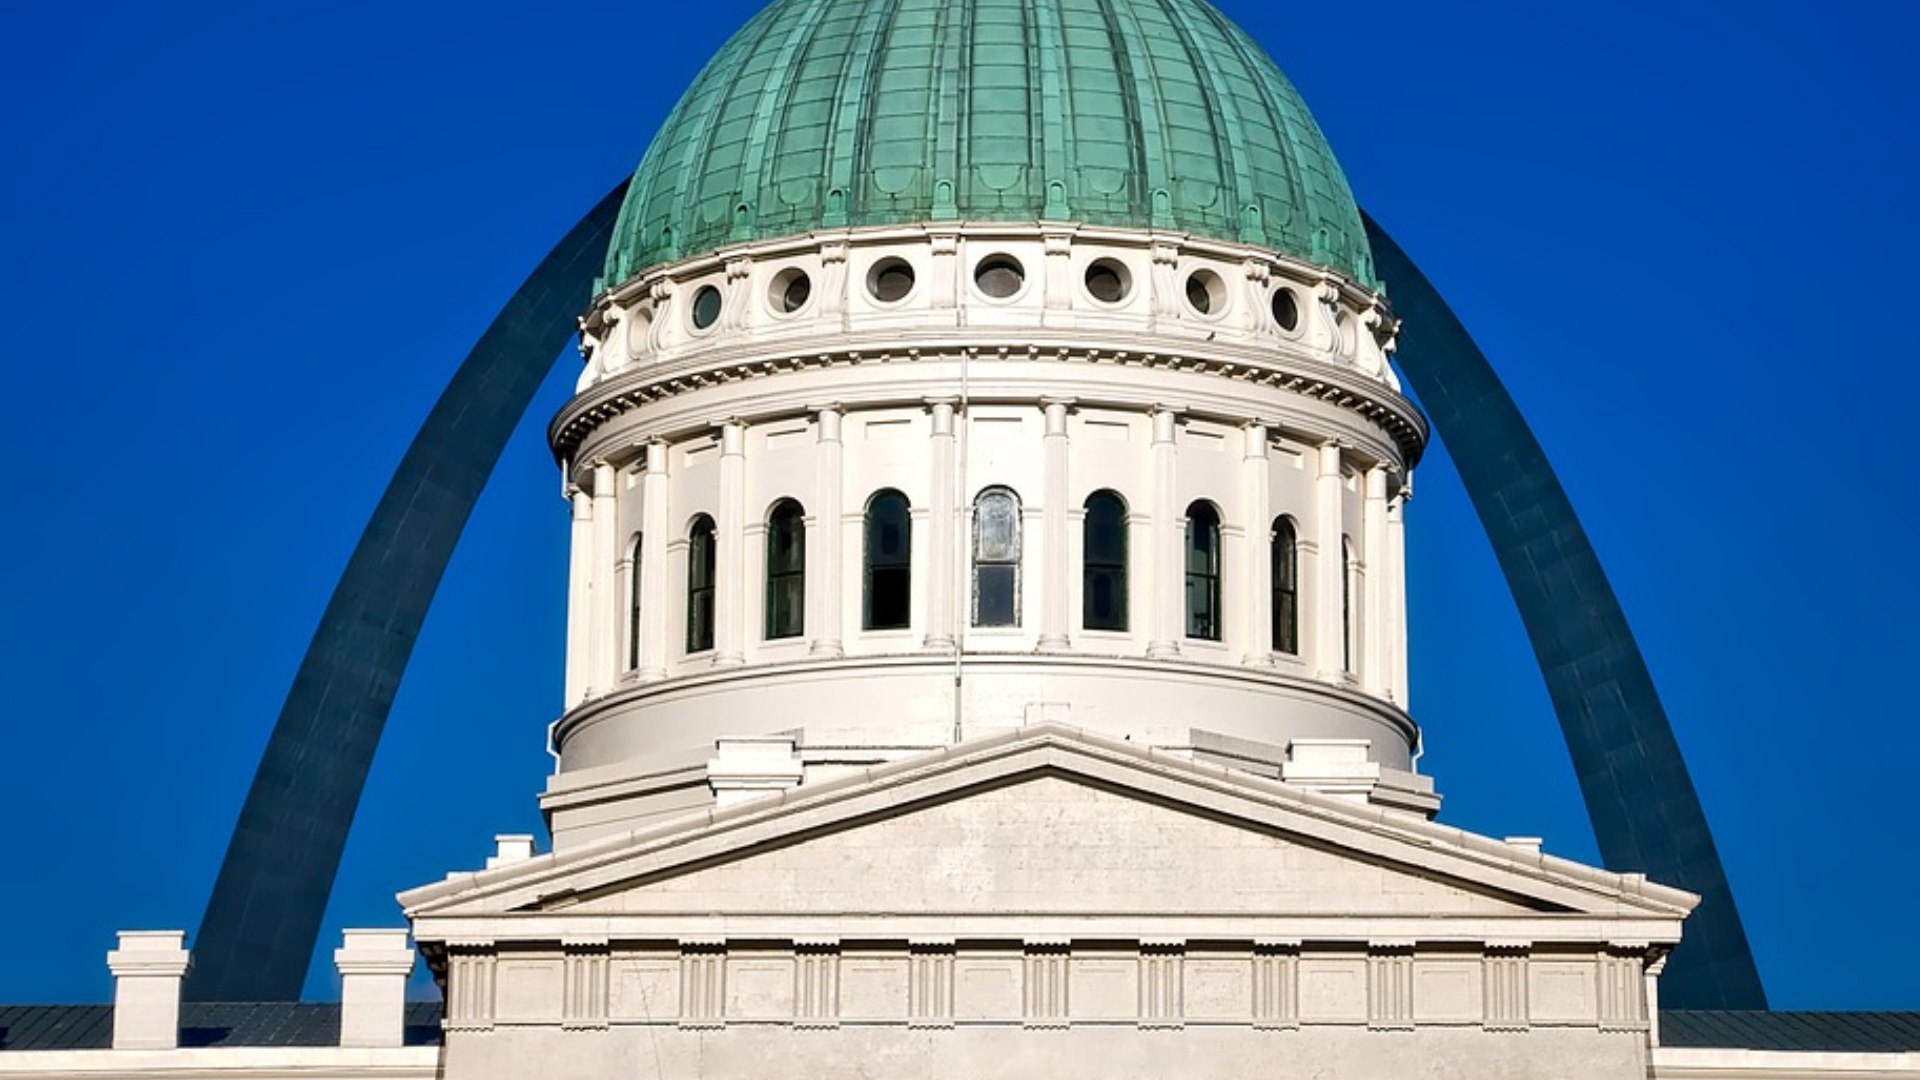 Gateway Arch and Old Capitol